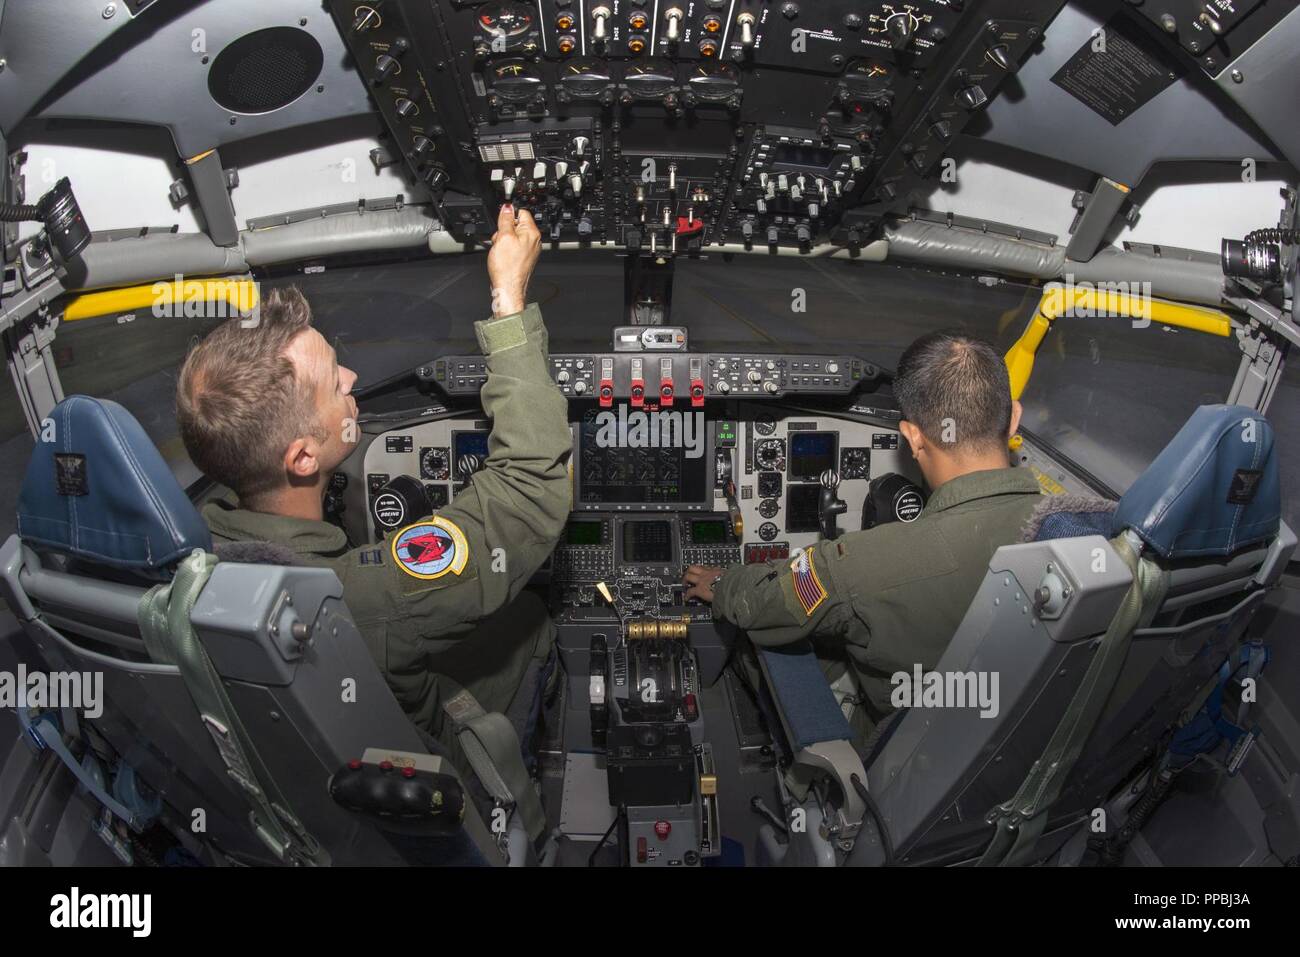 U.S. Air Force Capt. Josh Welch, left, and 2nd Lt. Kent Melendez, right, both pilots assigned to the 50th Air Refueling Squadron, perform pre-flight procedures in the KC-135 flight simulator at MacDill Air Force Base, Fla, Aug. 17, 2018. Pilots perform multiple simulator flights each year testing their proficiency with the aircraft and their ability to handle a wide array of emergency scenarios. Stock Photo